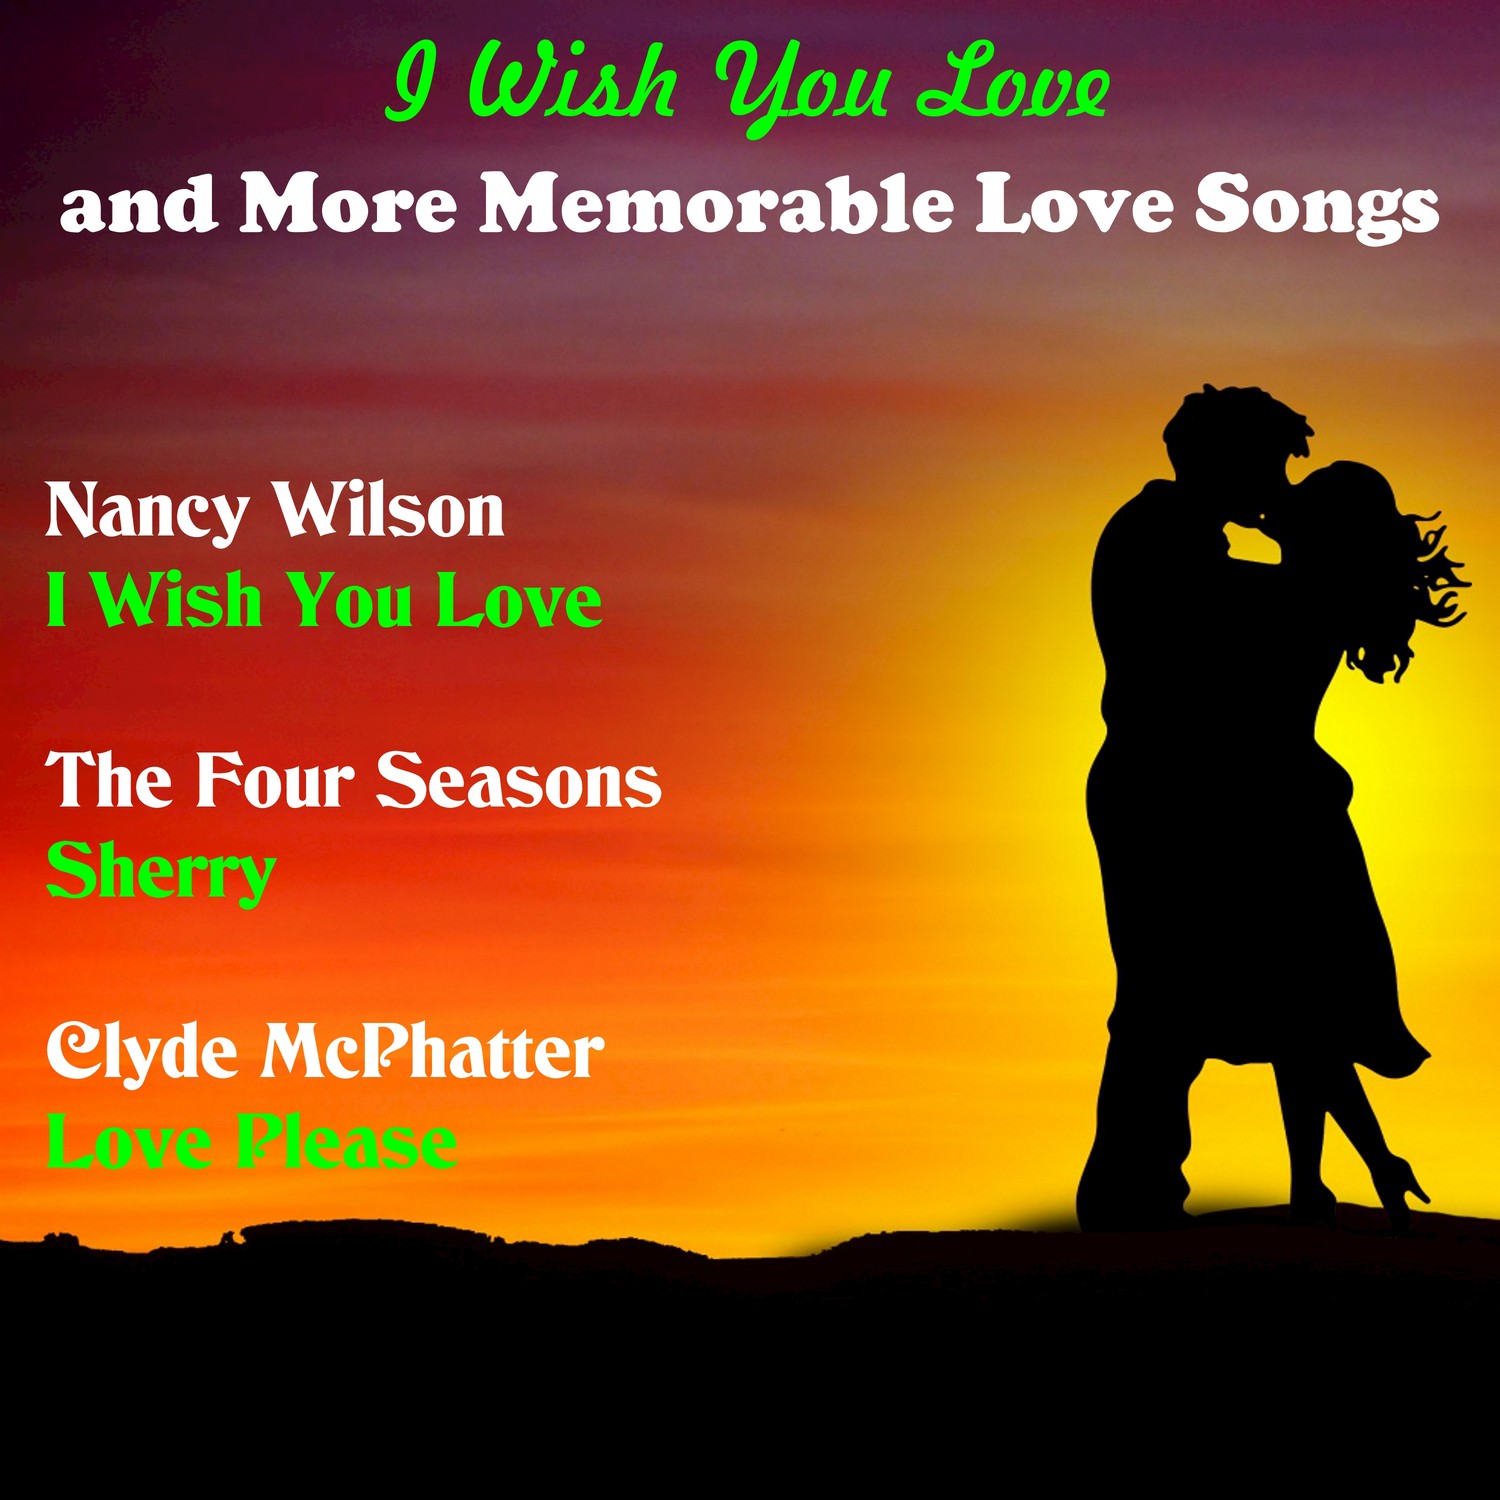 I Wish You Love and More Memorable Love Songs